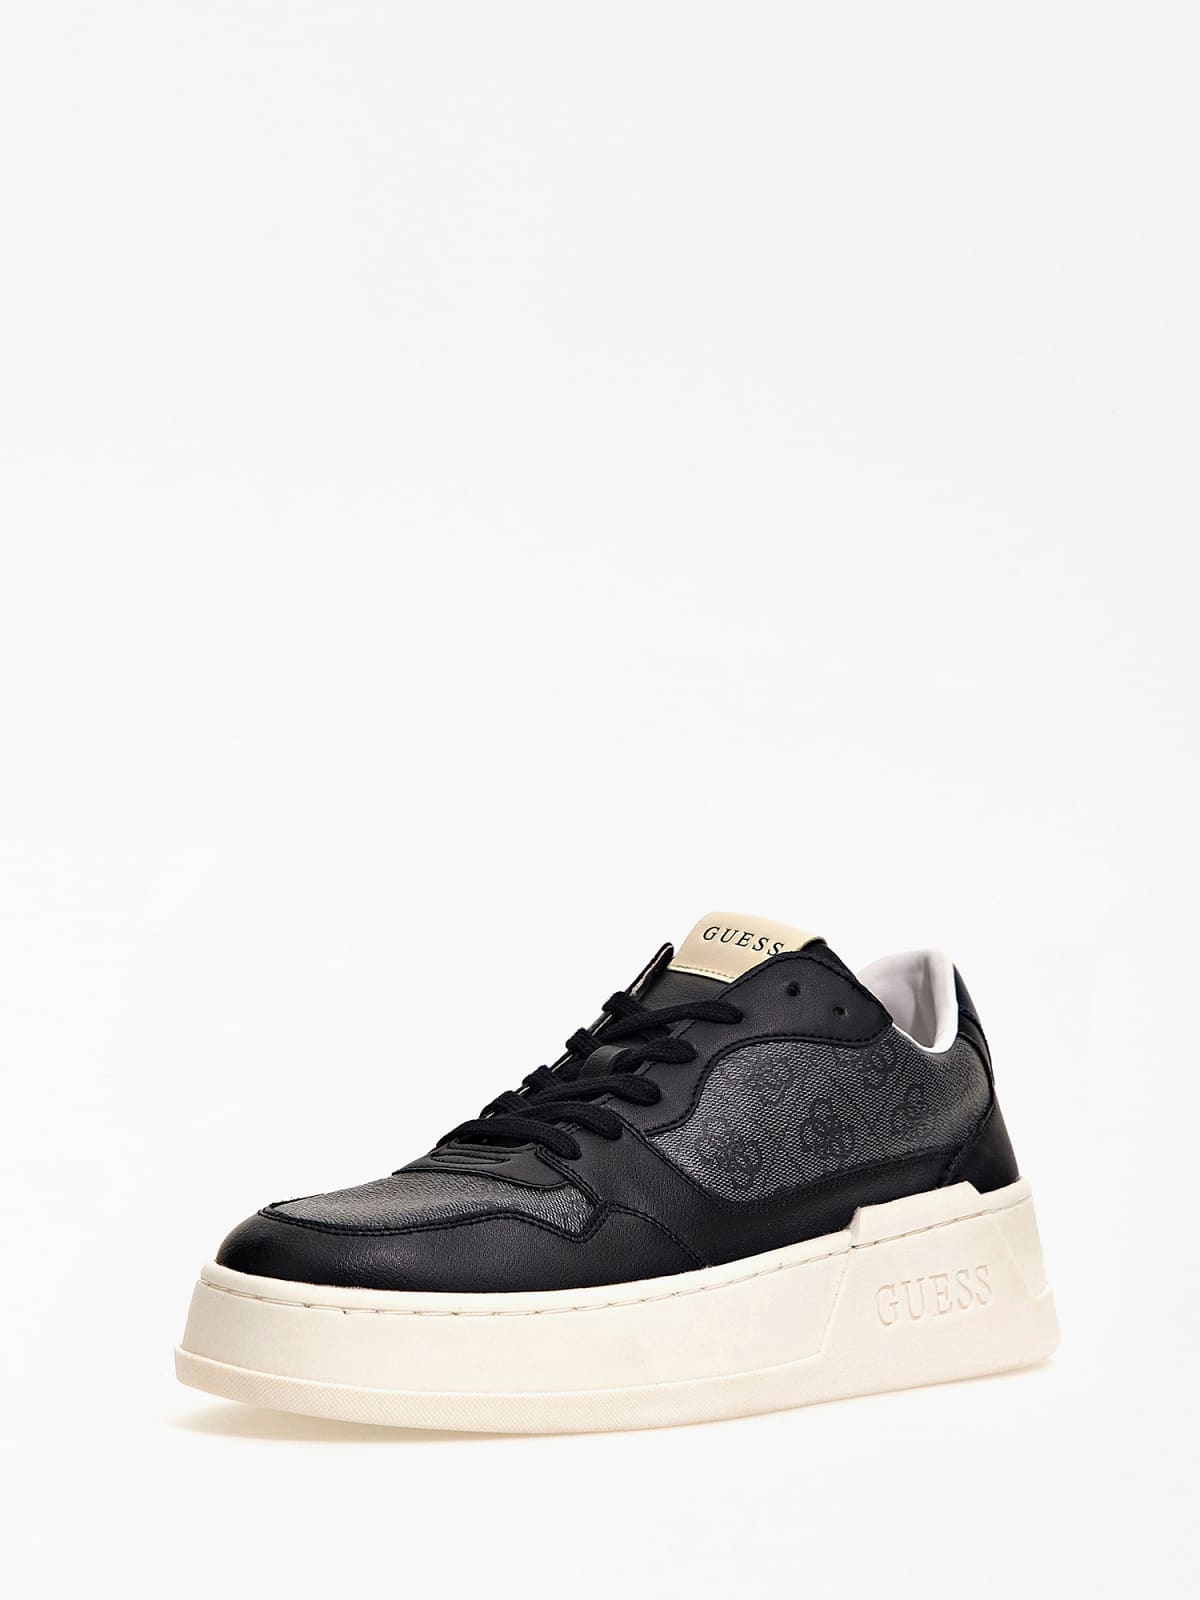 Guess Ciano 4G Logo Sneaker | Rather Saucy